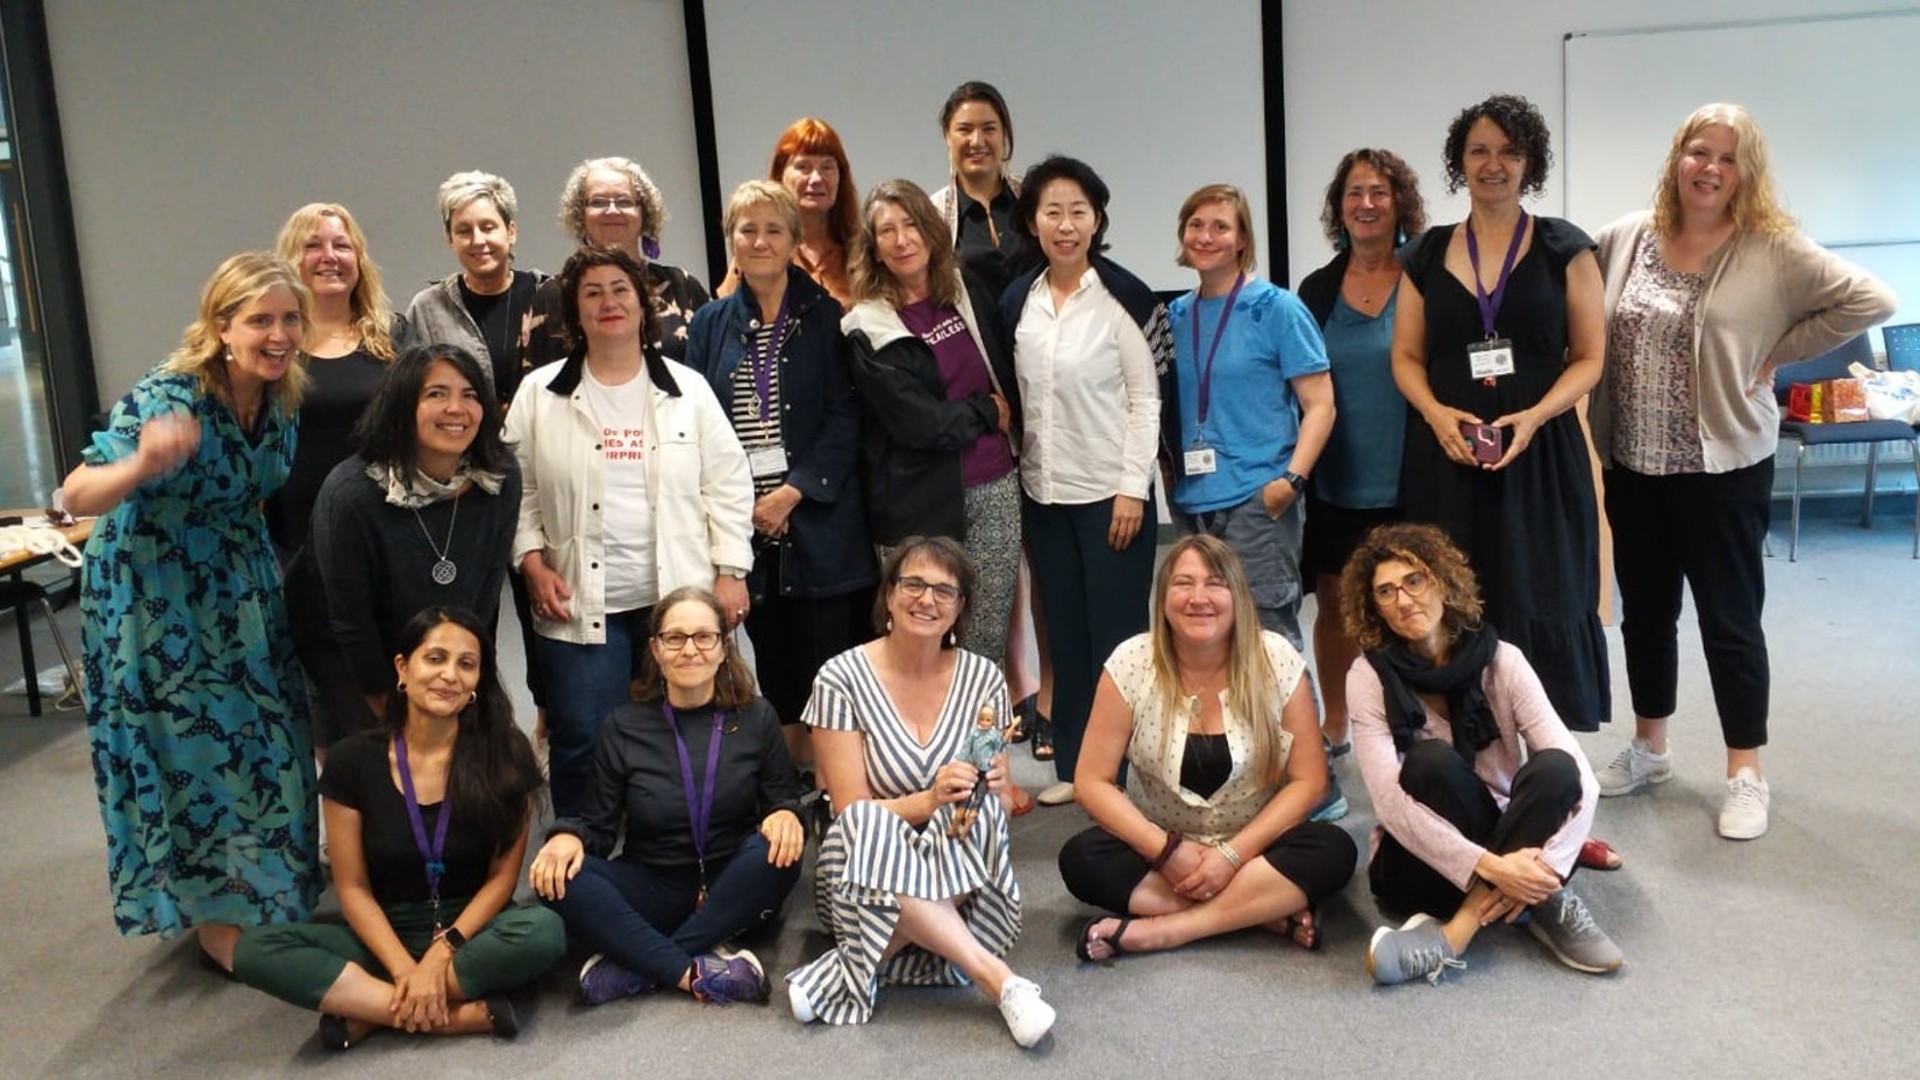 Group of researchers, academics and artists at a feminism conference